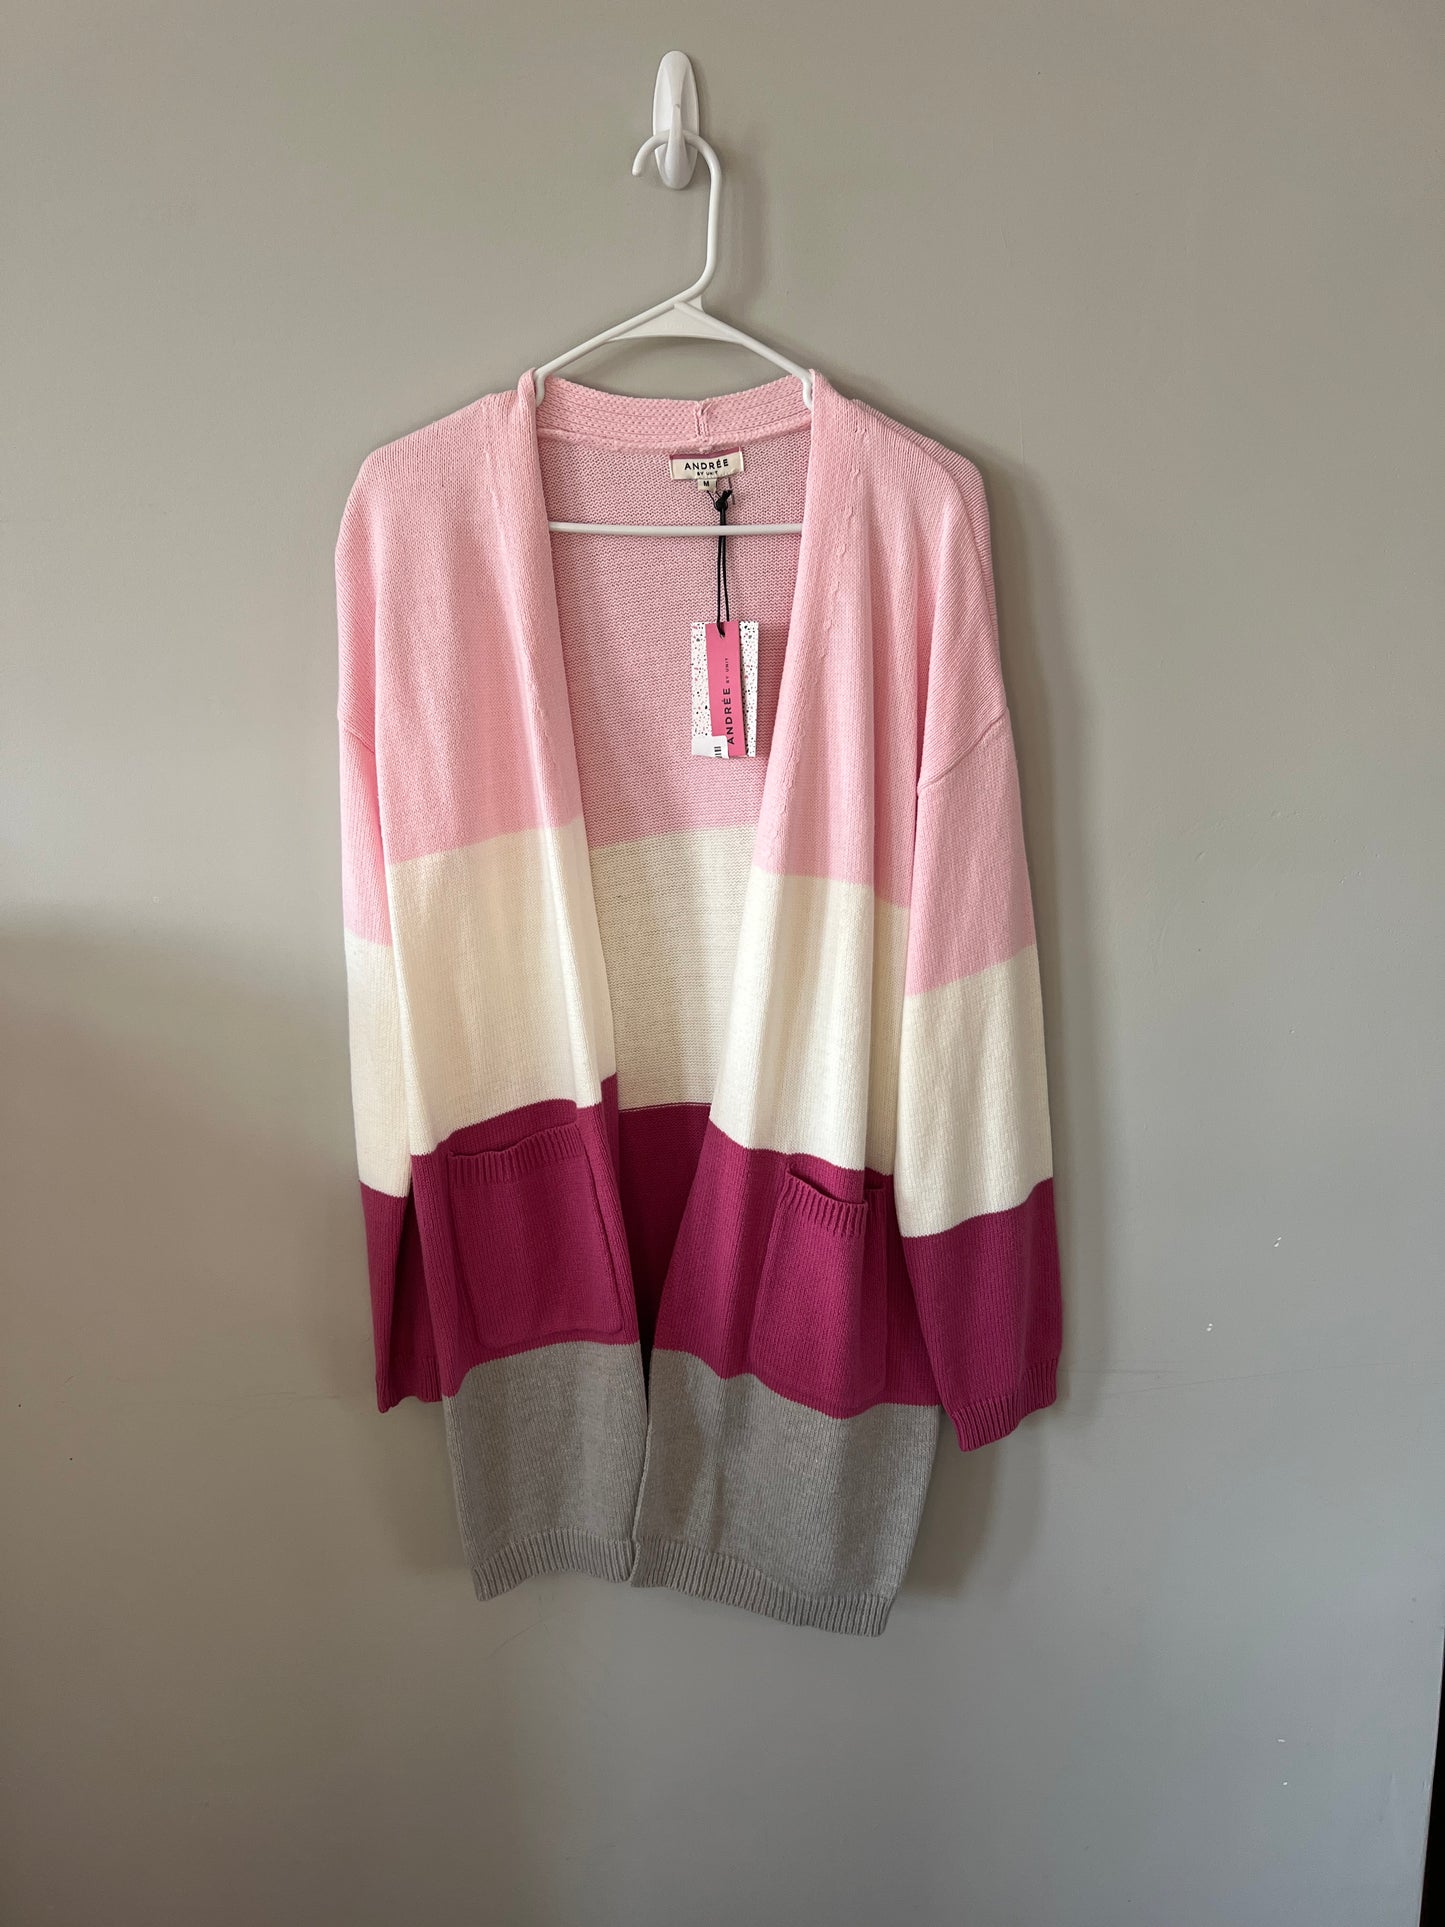 NWT Pink Colorblock Women's Sweater